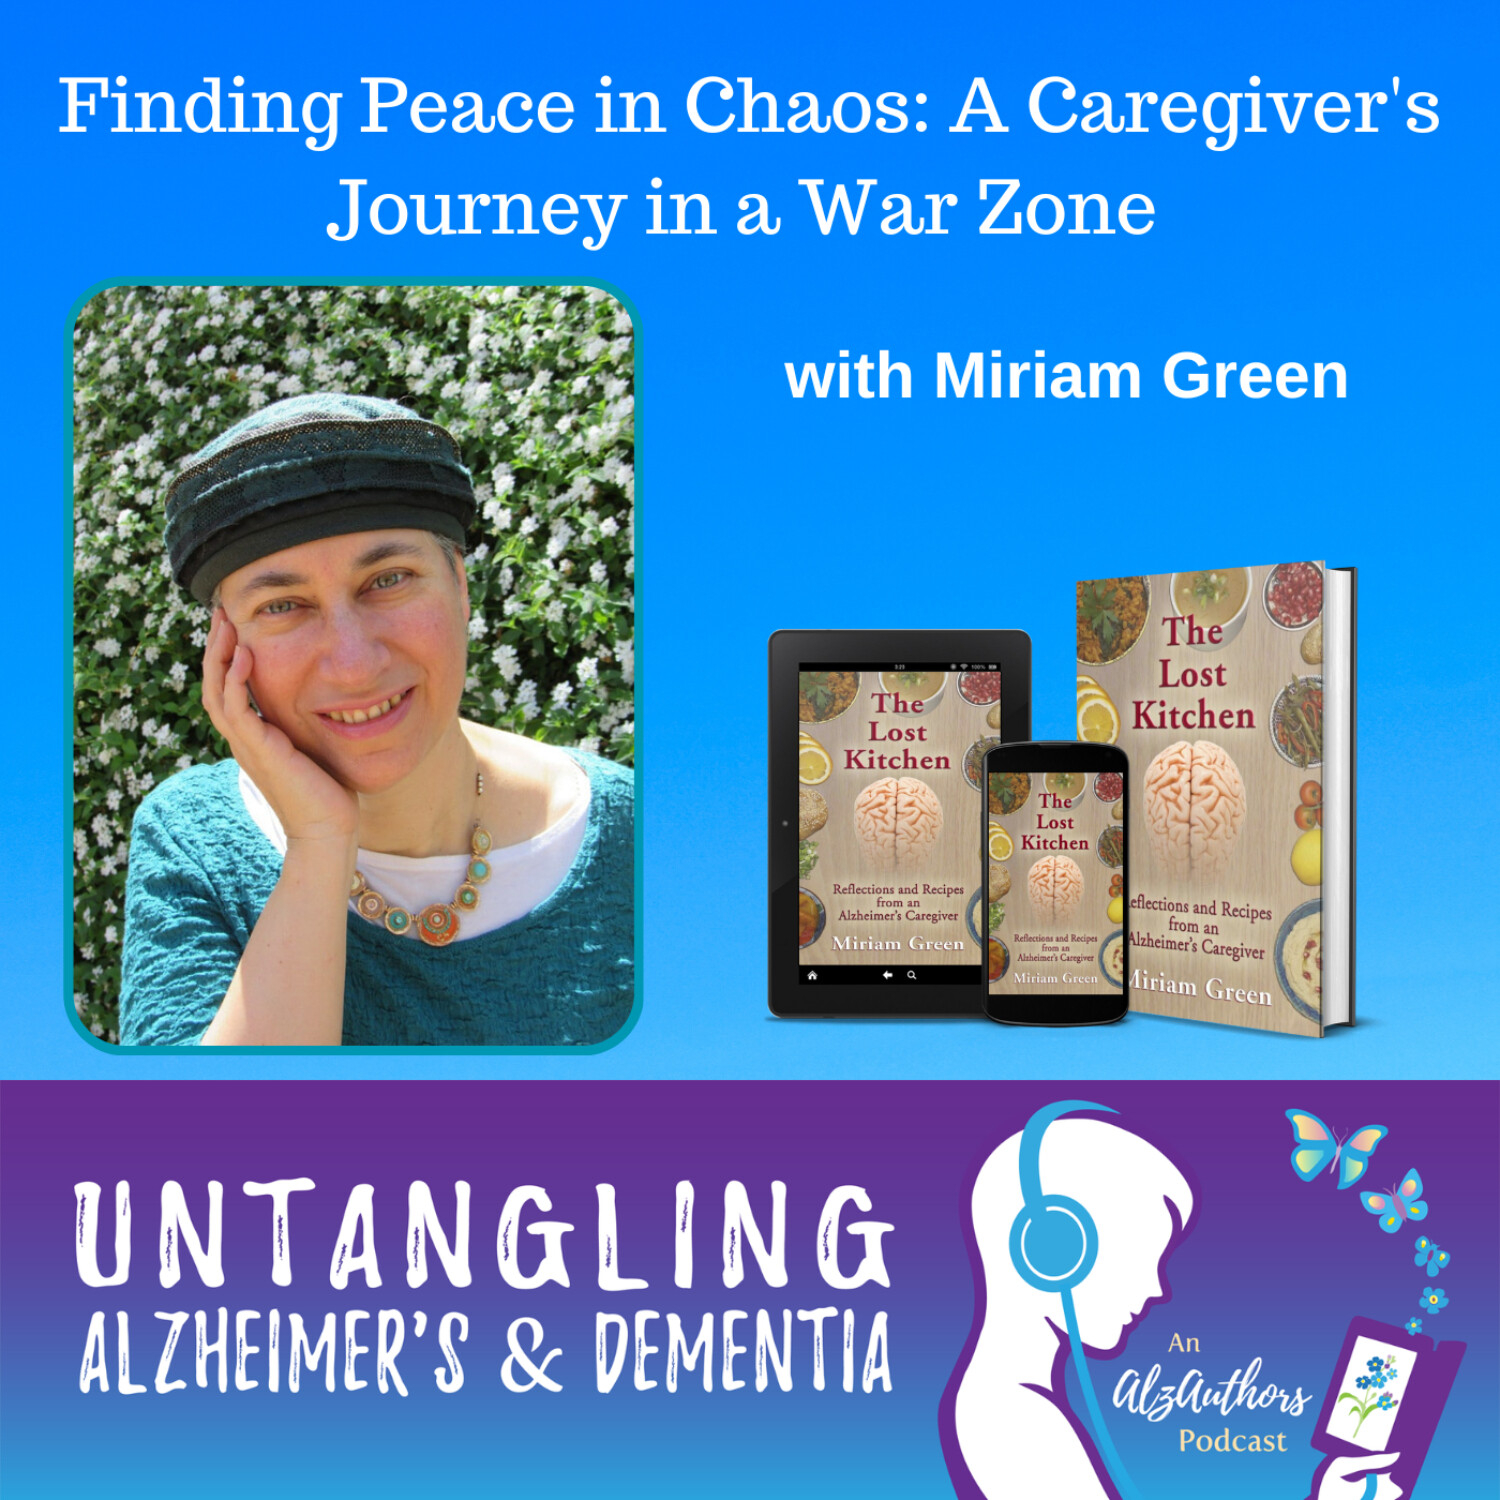 Finding Peace in Chaos: A Caregiver’s Journey in a War Zone with Miriam Green